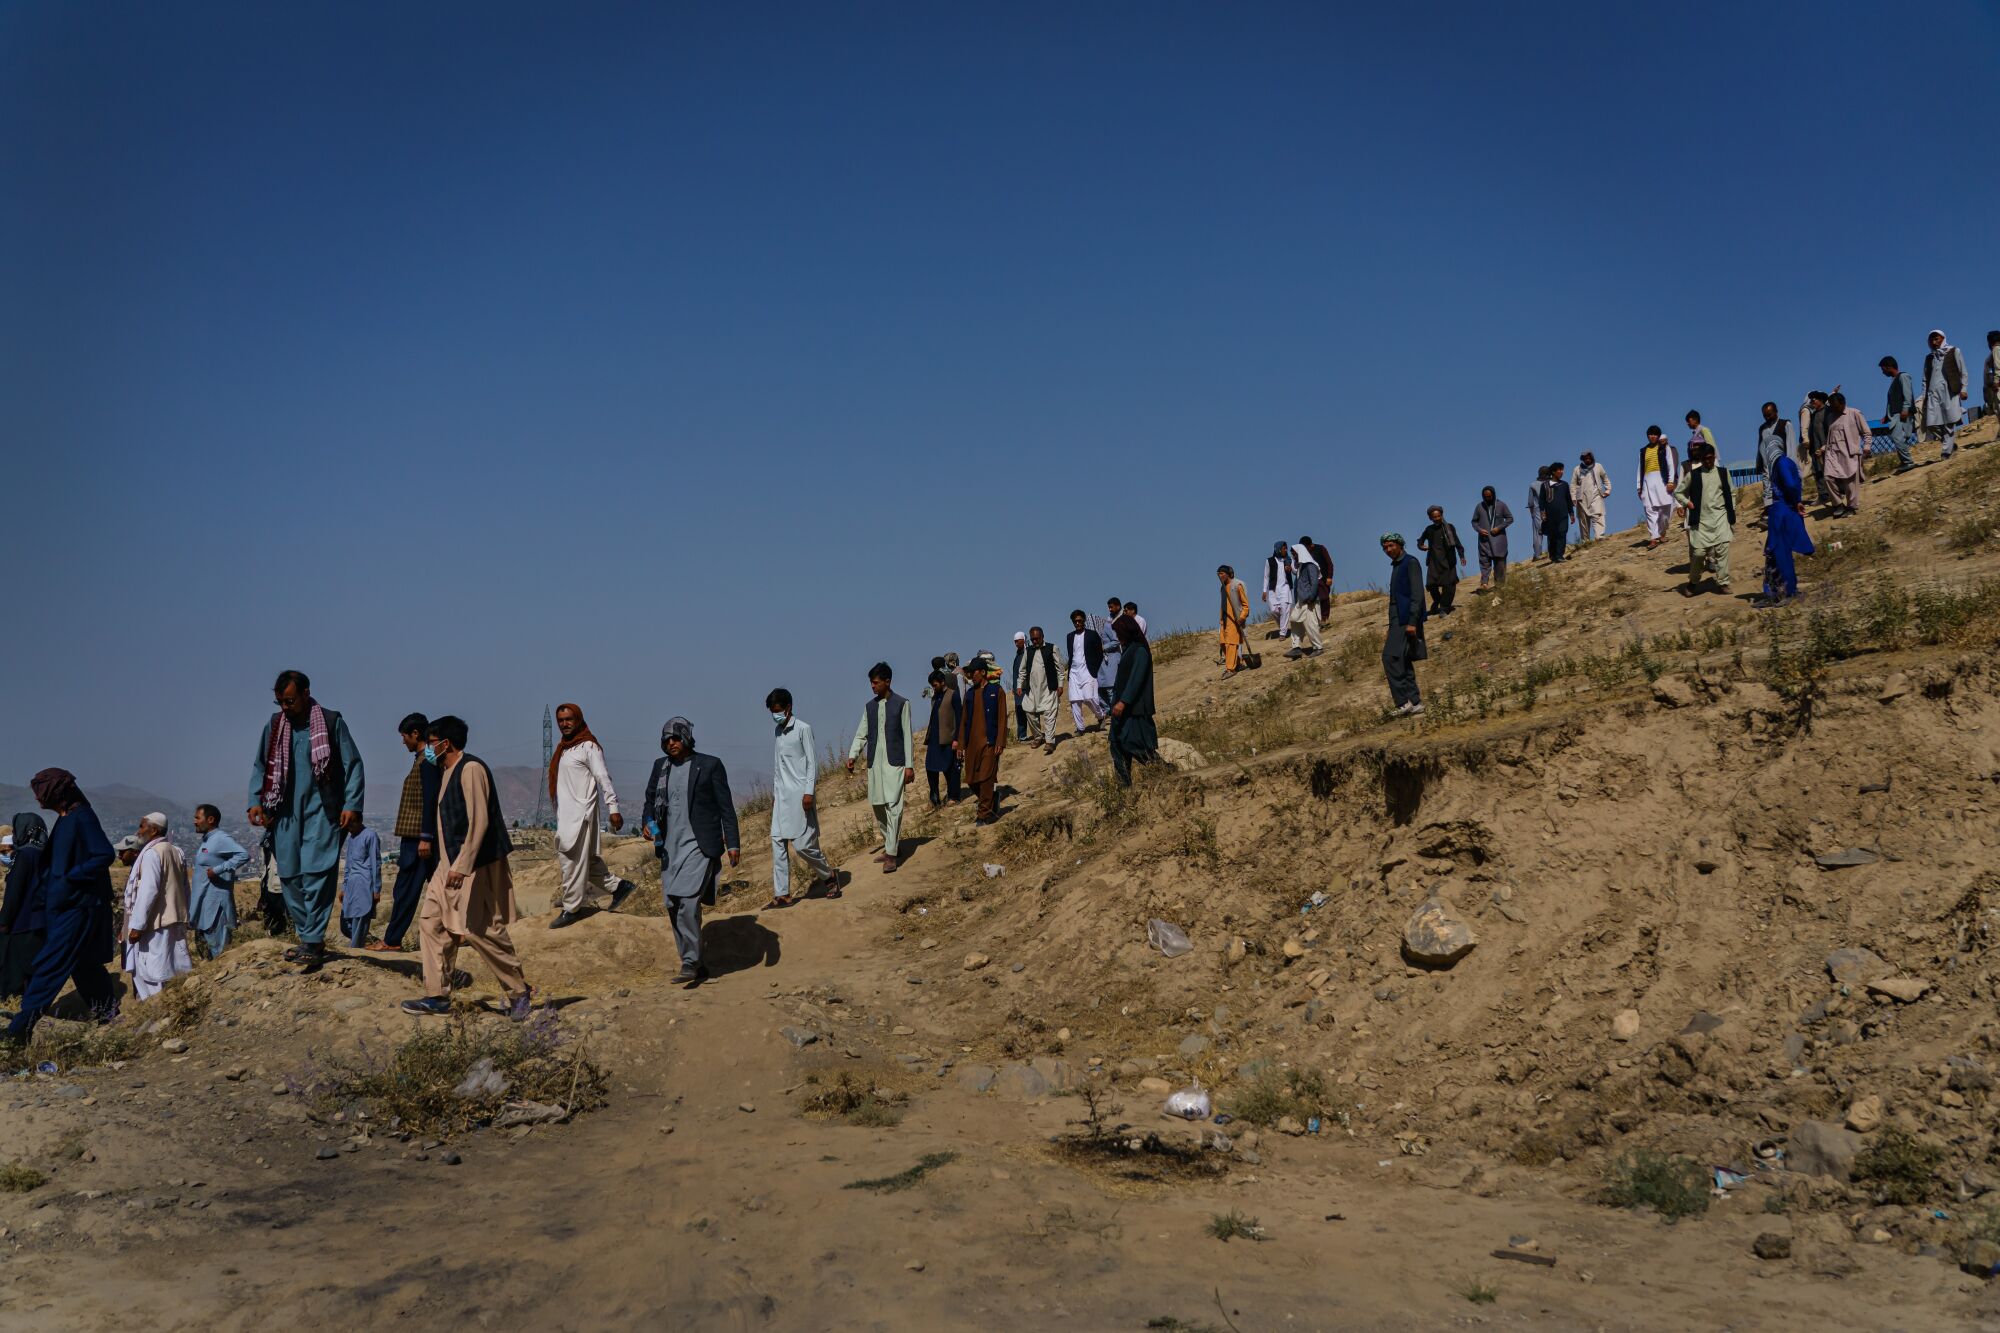 Relatives walk down Martyrs Hill after a funeral for Mushtaq.